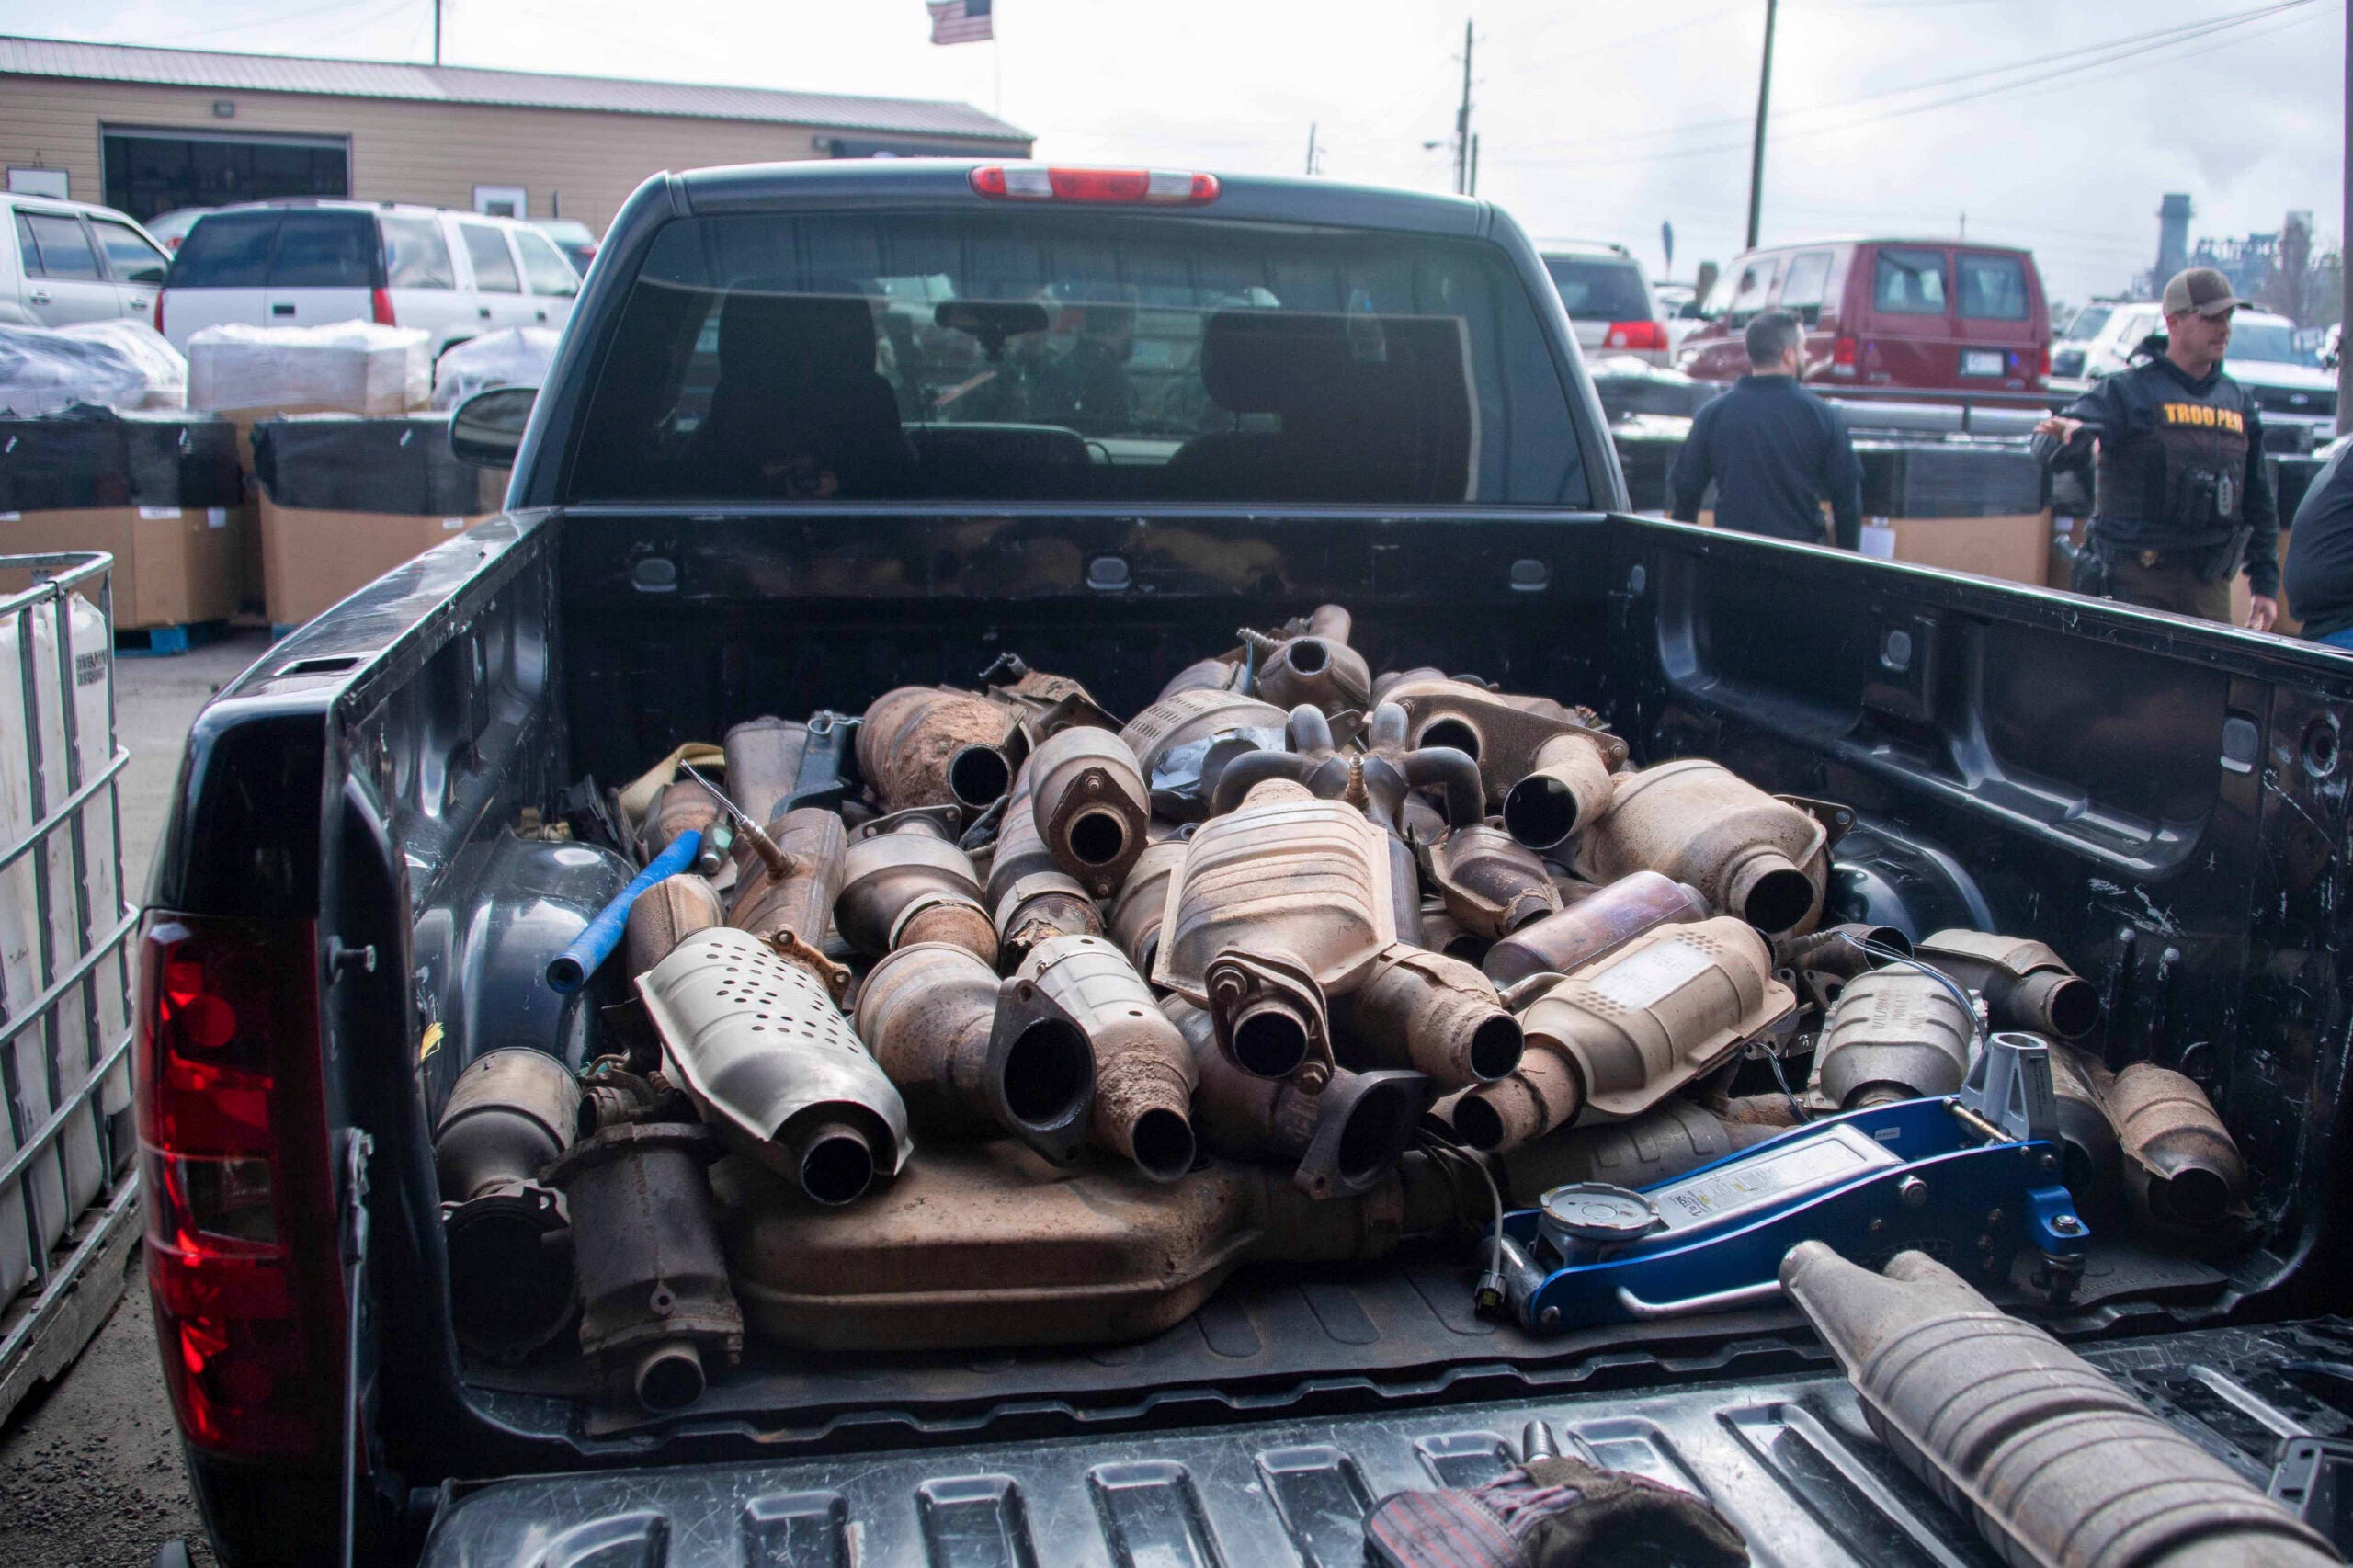 A truckload of catalytic converters. 